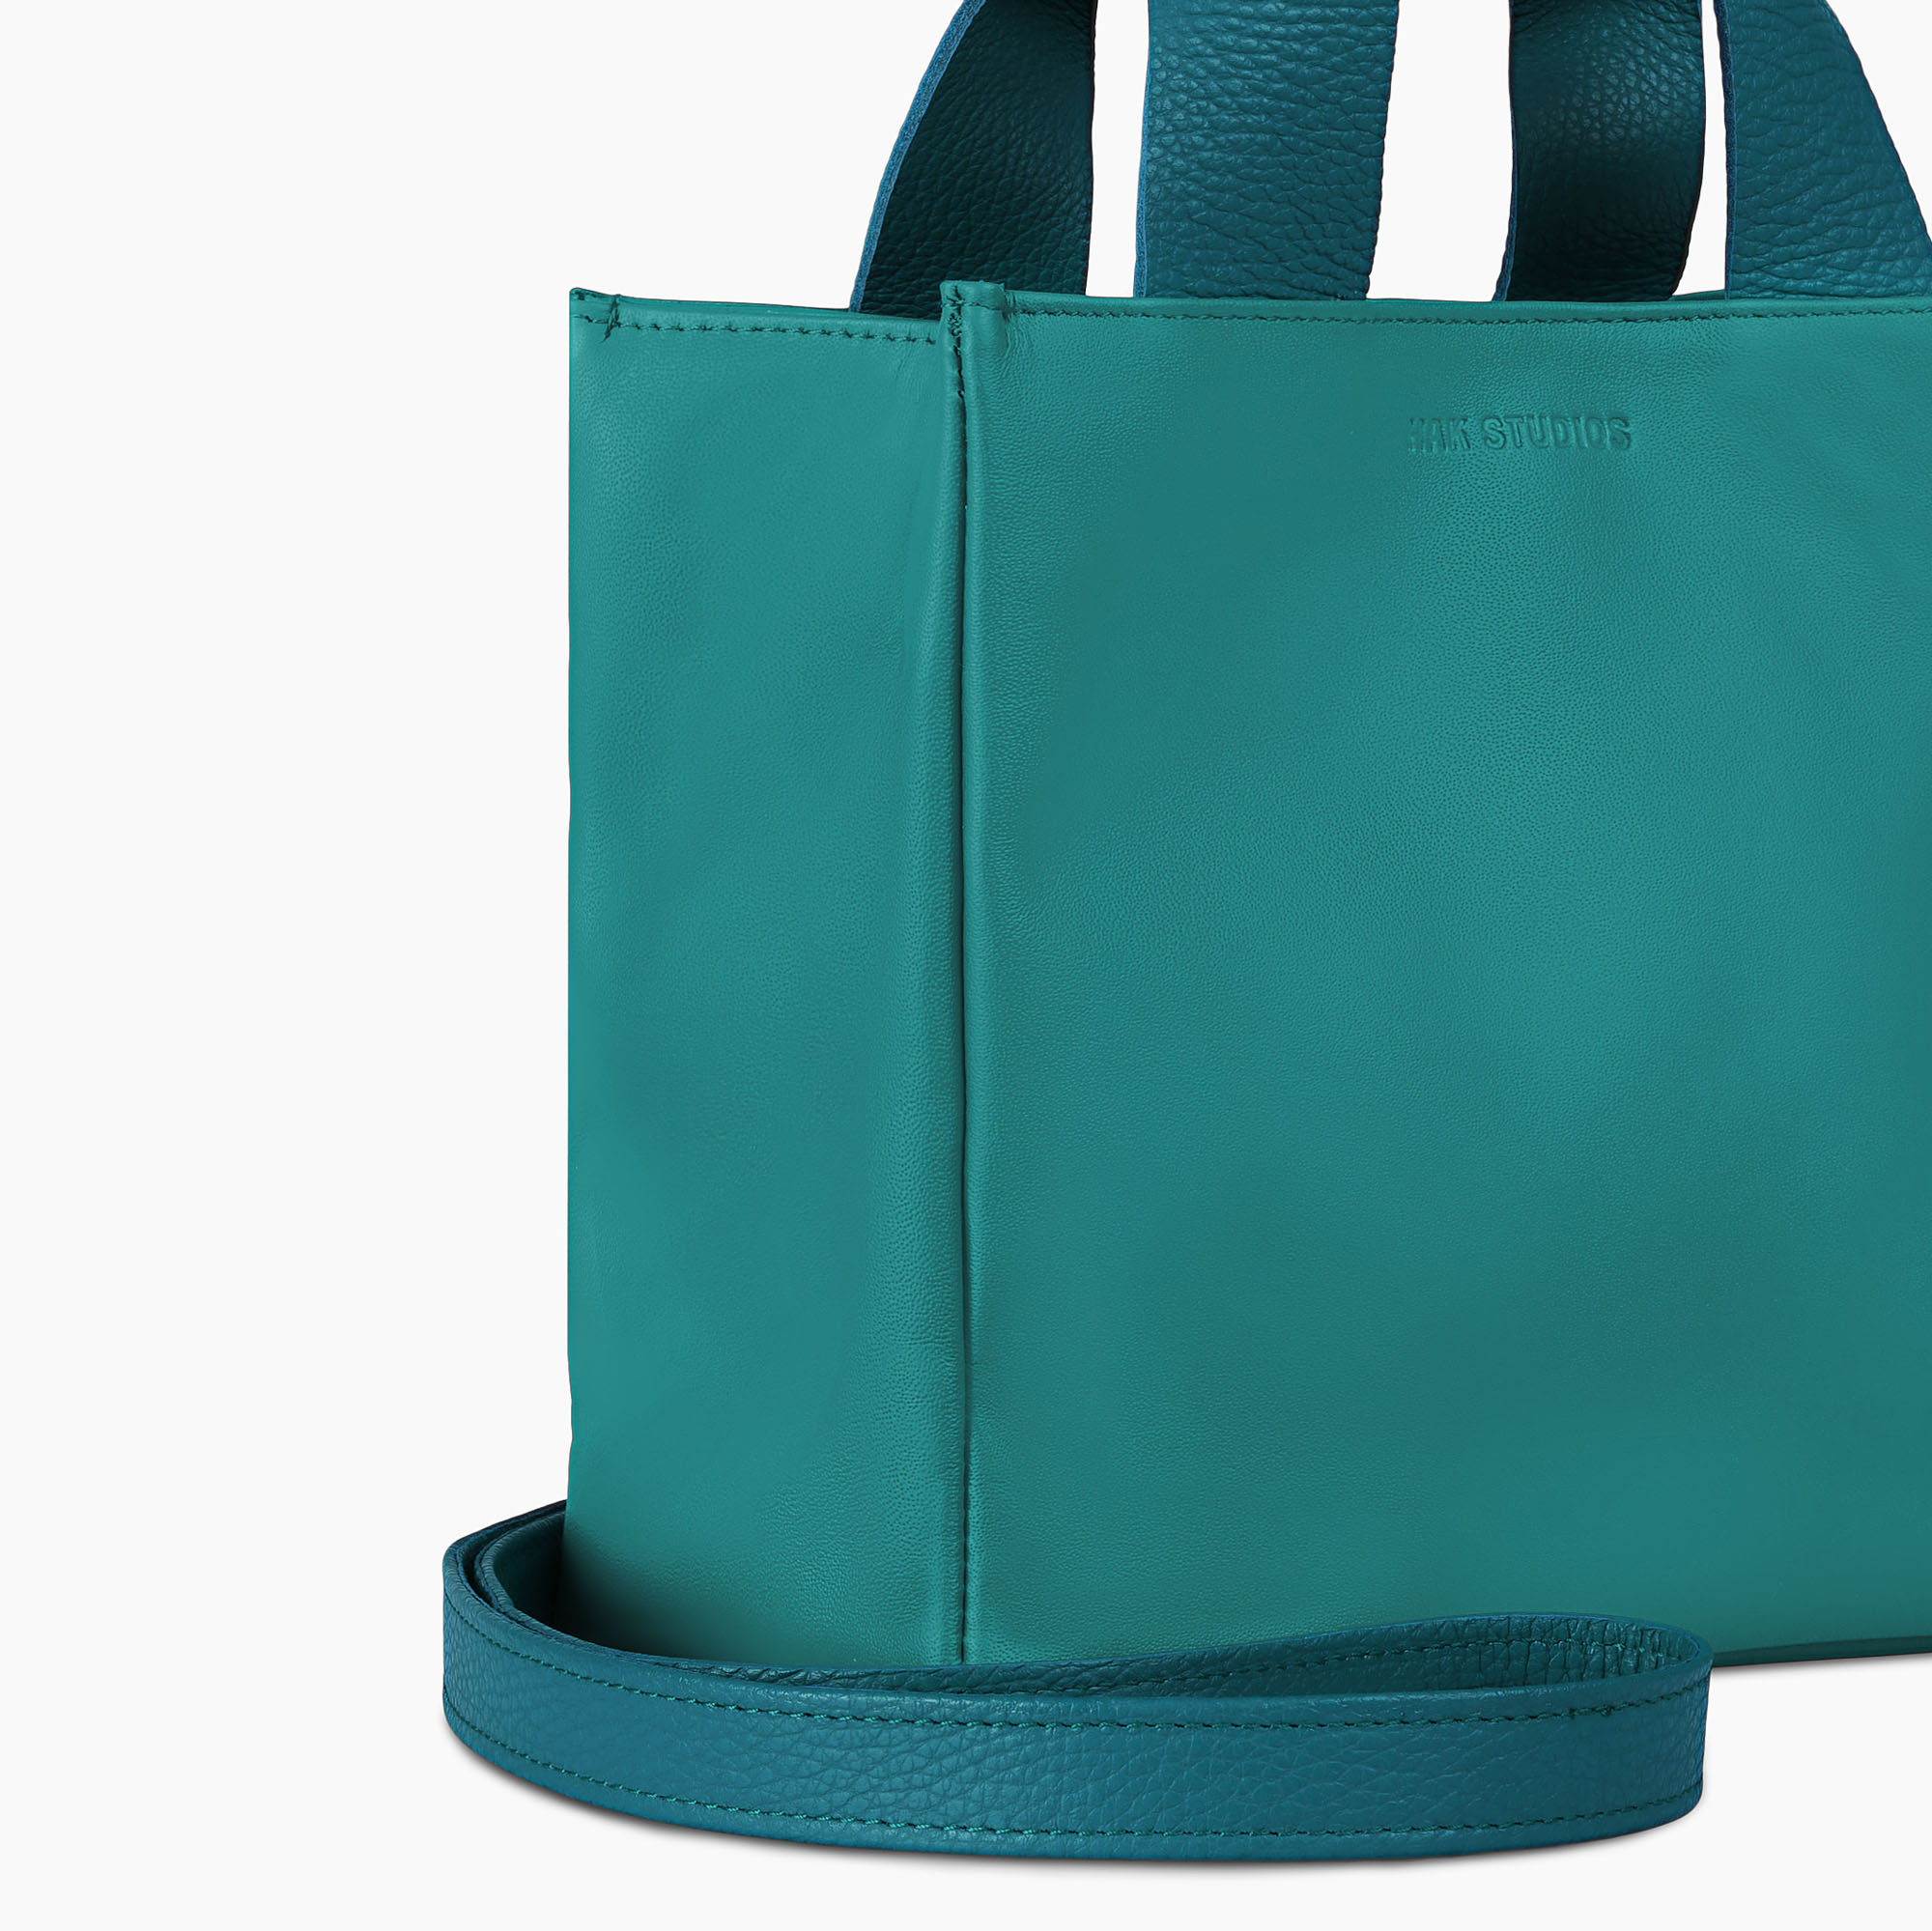 Small leather tote bag in blue color